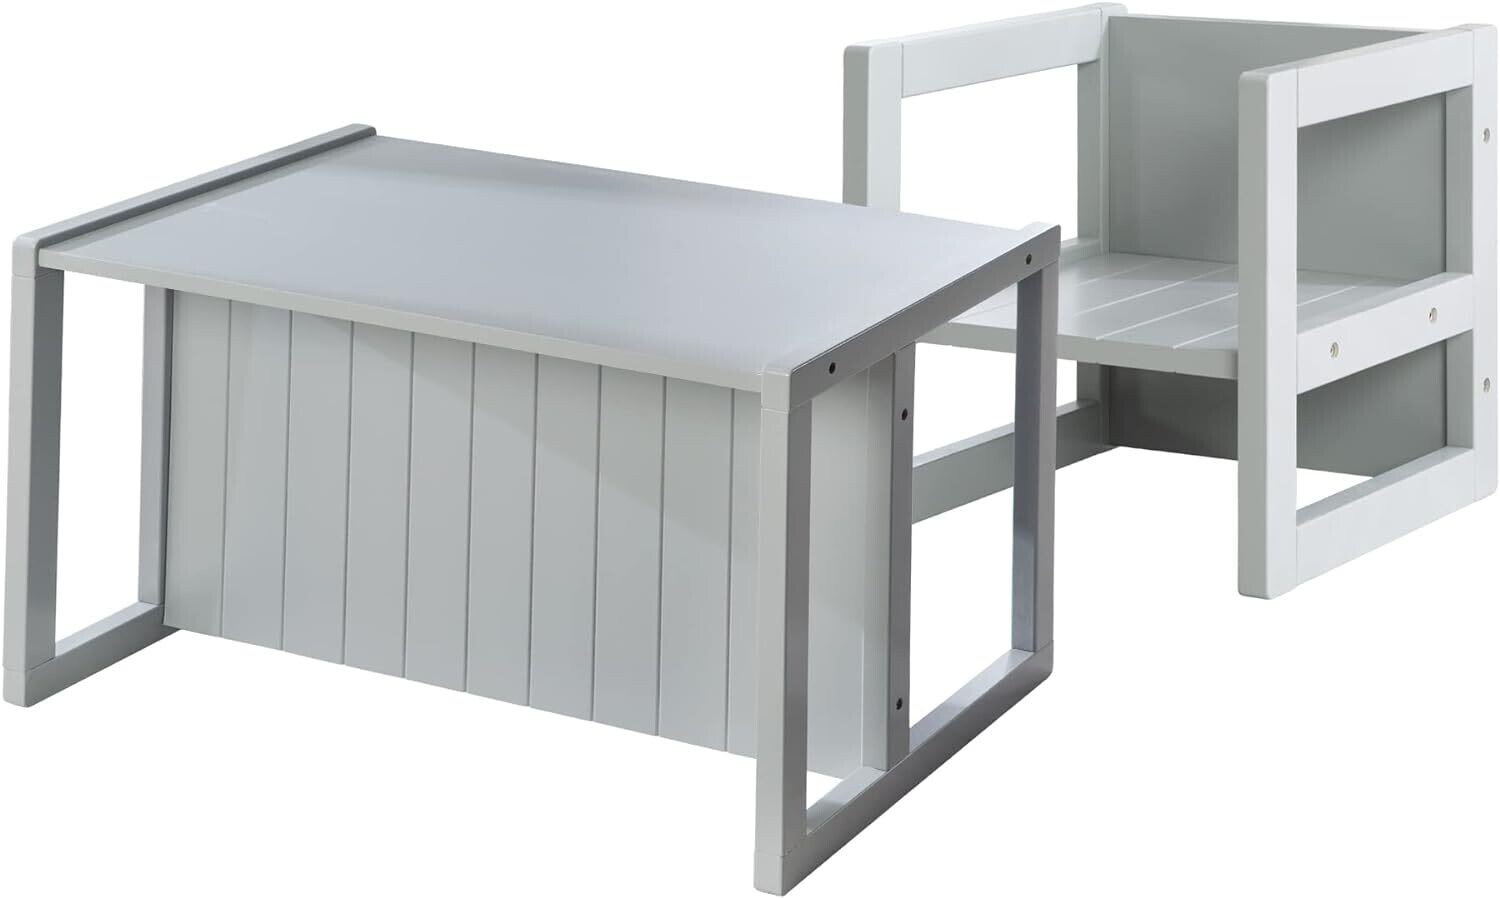 Country House Style Furniture Set for Children: Stool & Children's Table, Convertible to Children's Bench